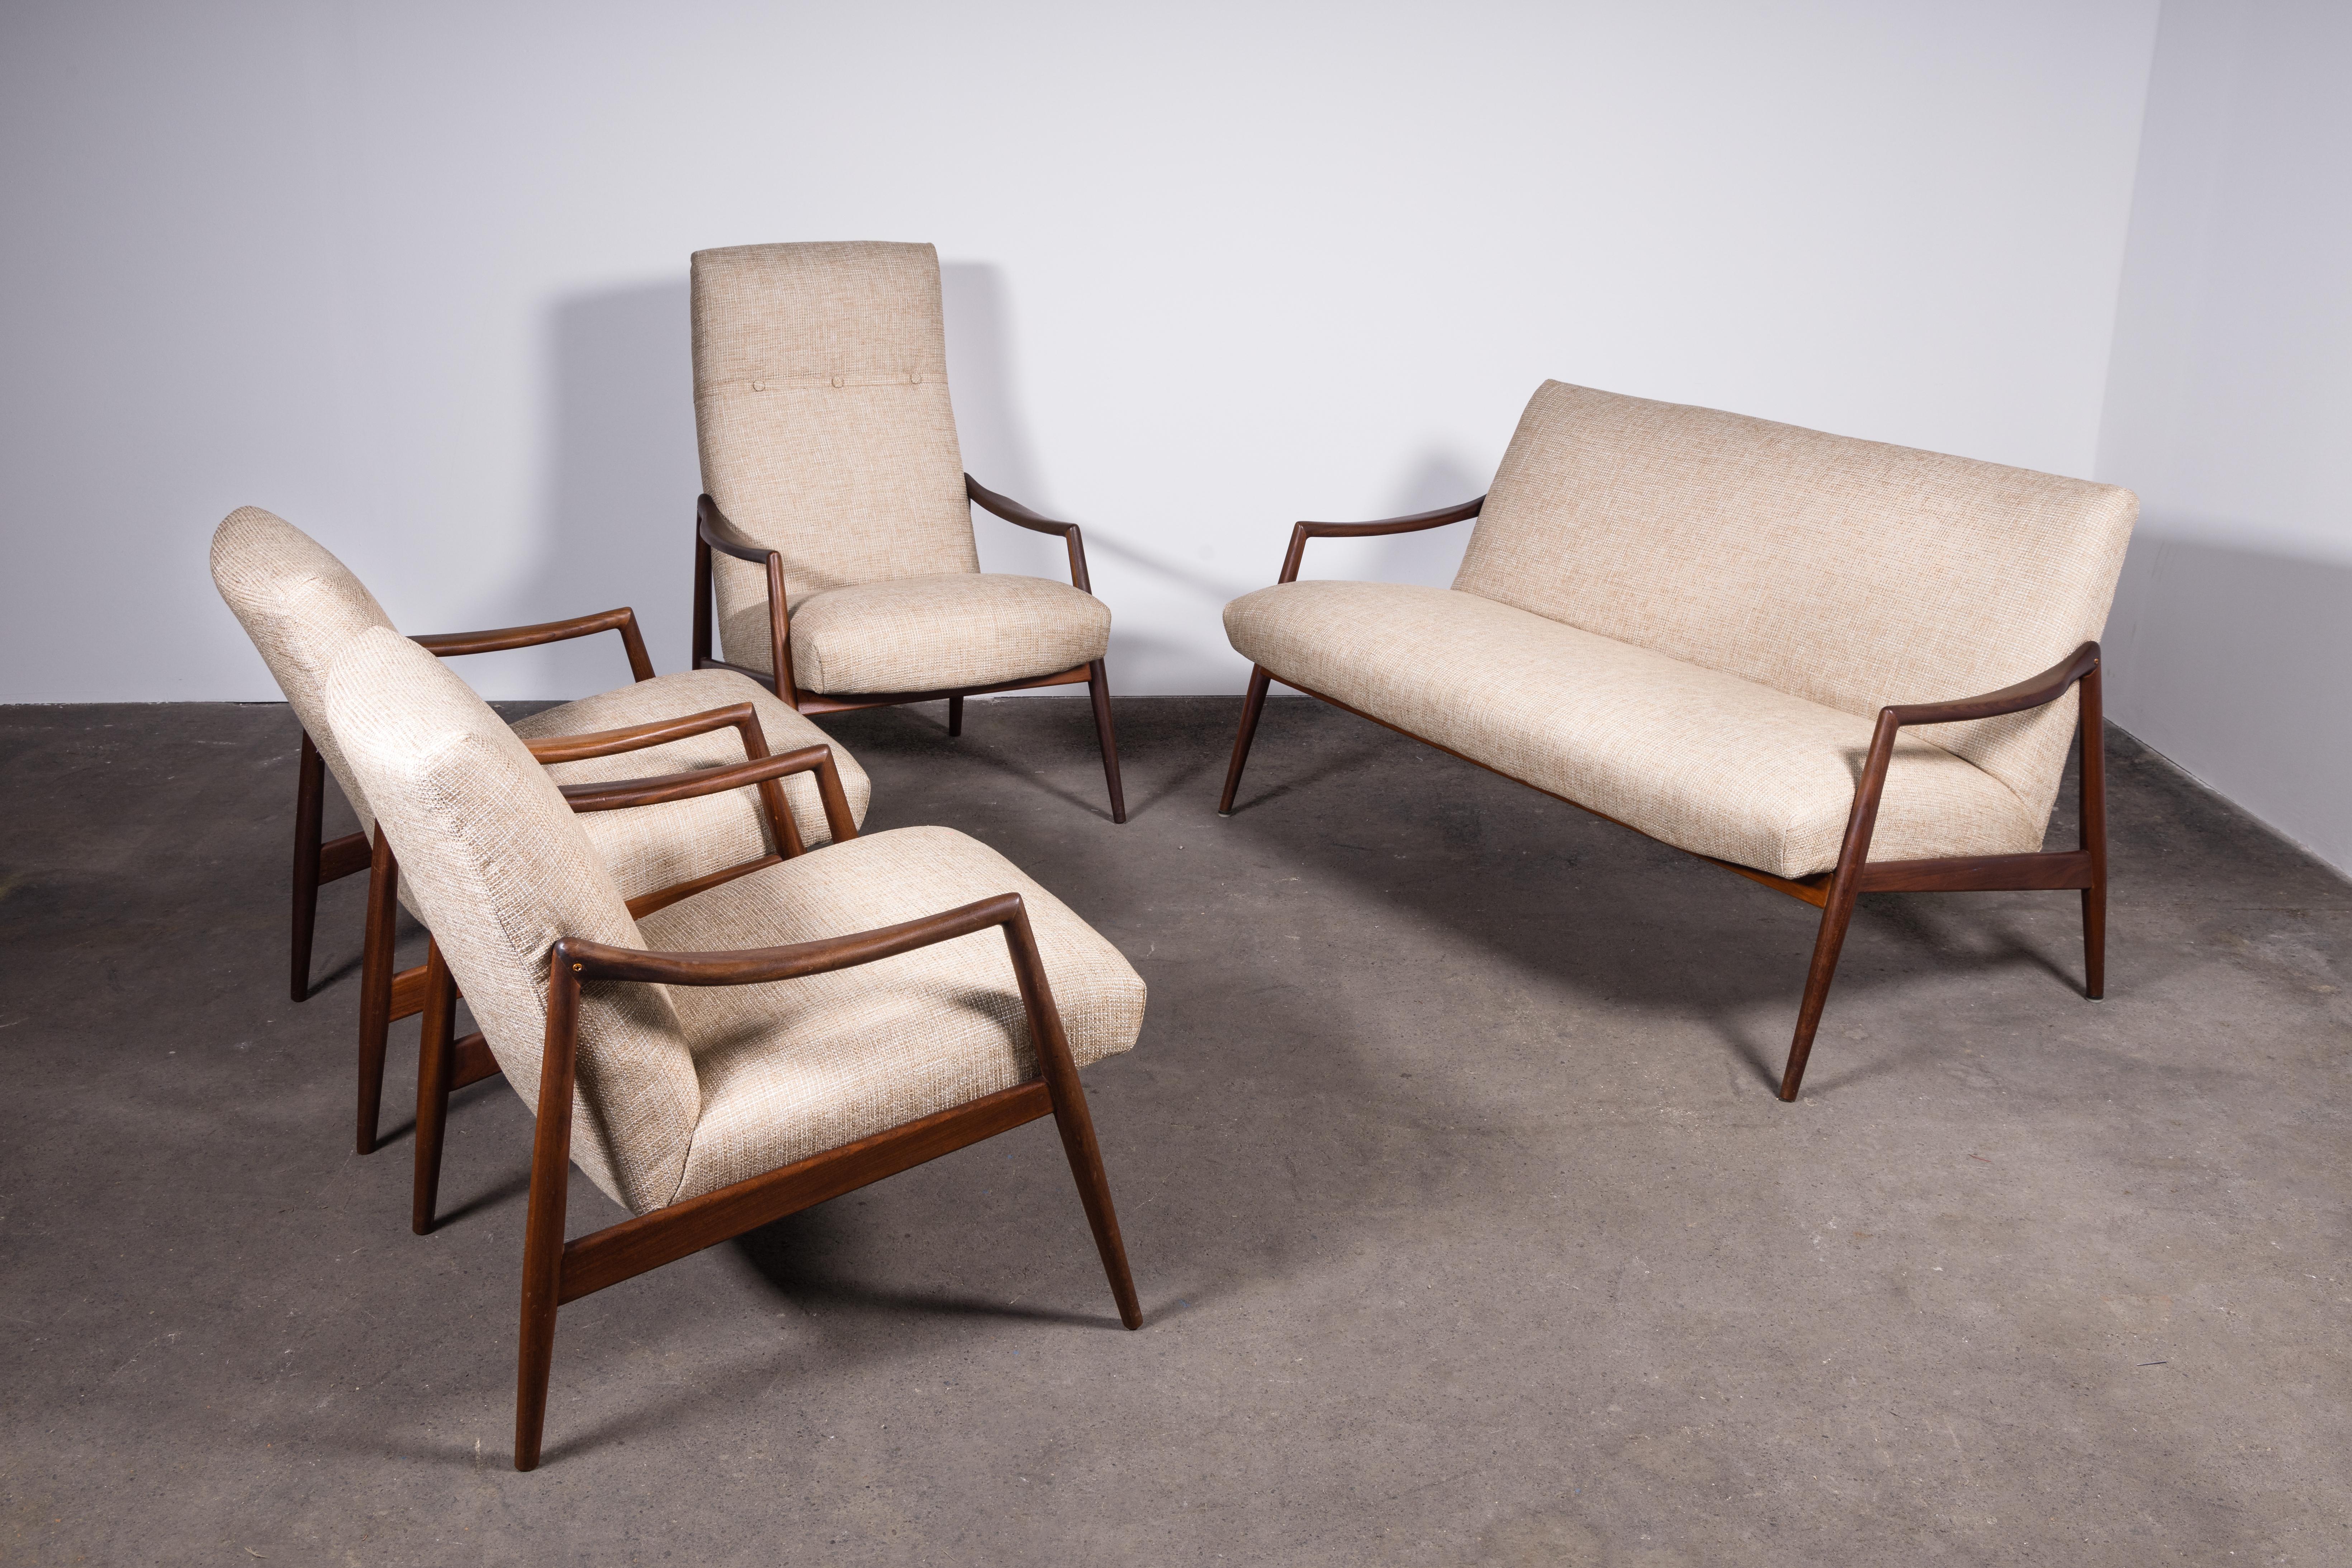 High-Back 1950s Teak Armchair by Lohmeyer upholstered à la Coco Chanel 2